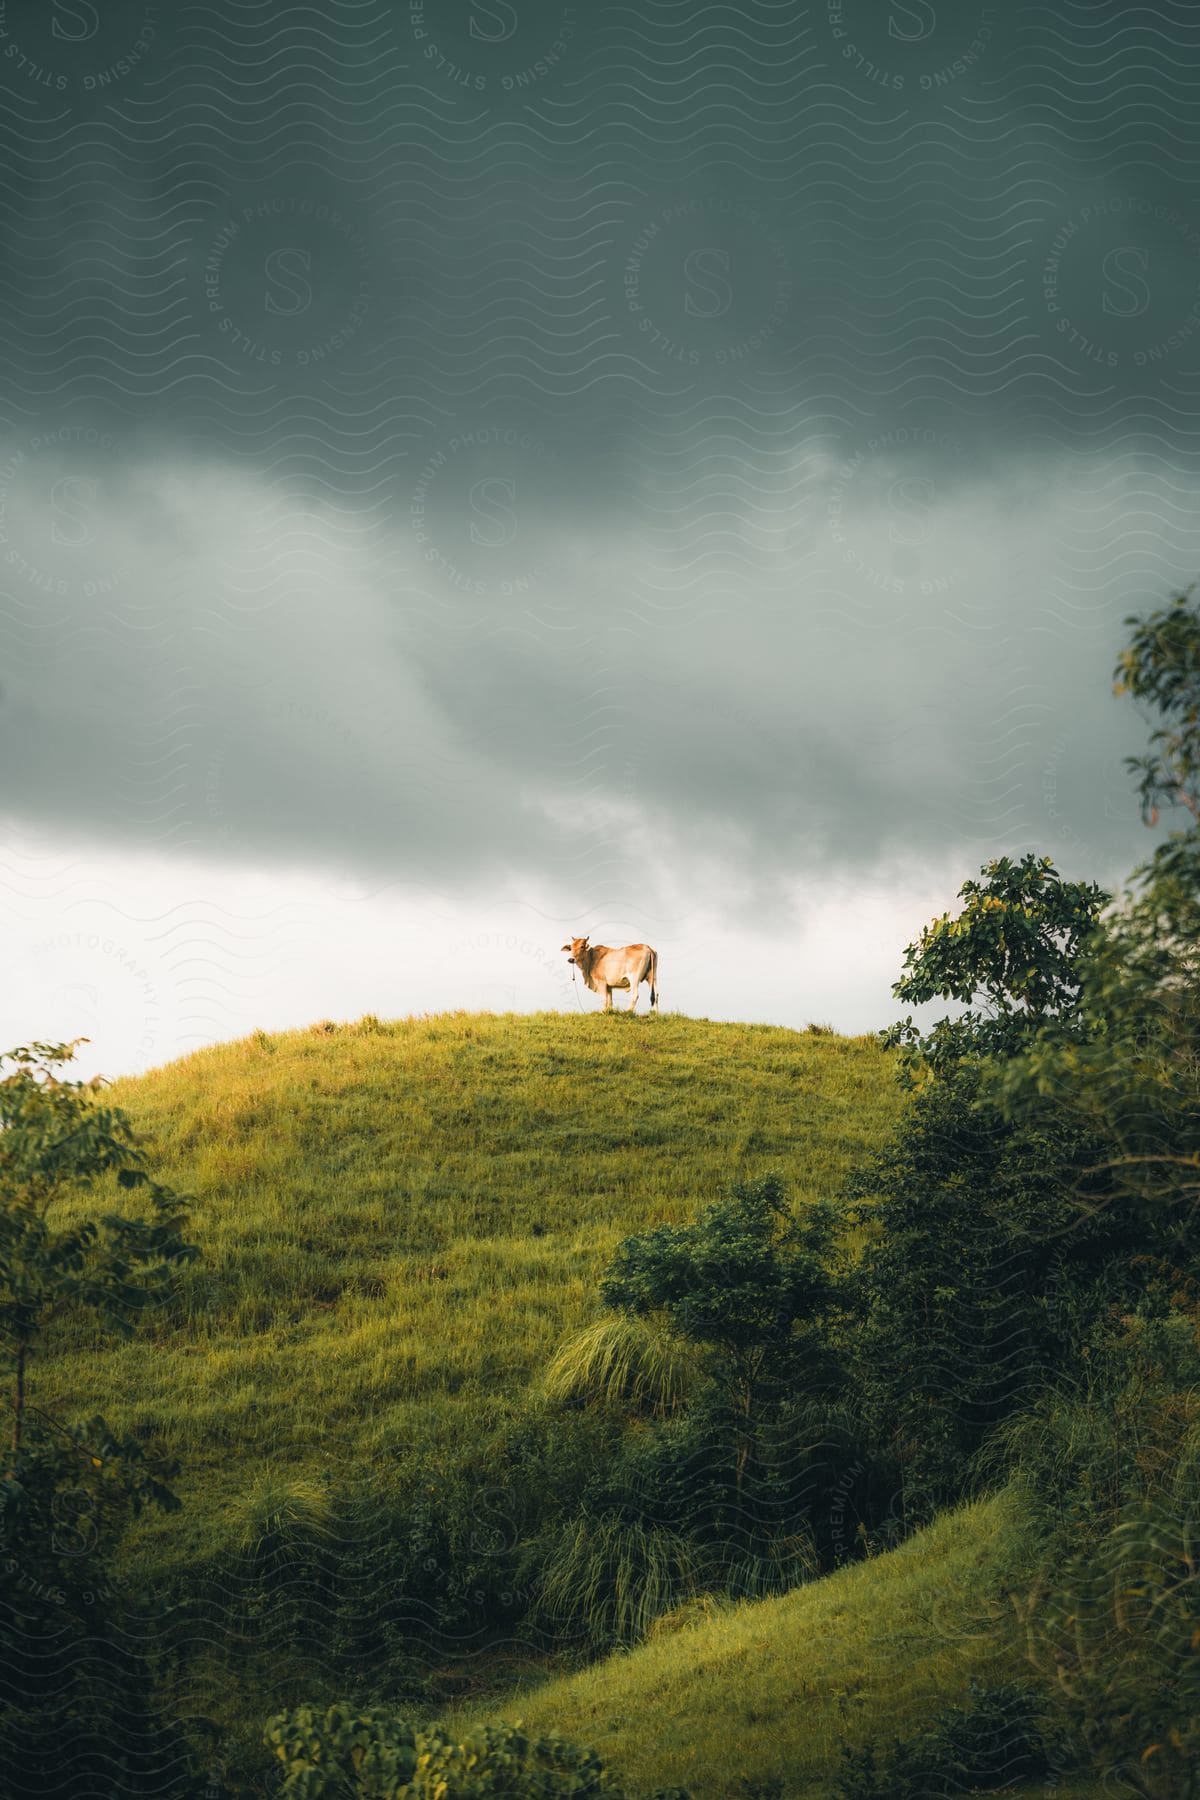 Cow on the peak of a hill in nature on a clear day with black clouds.